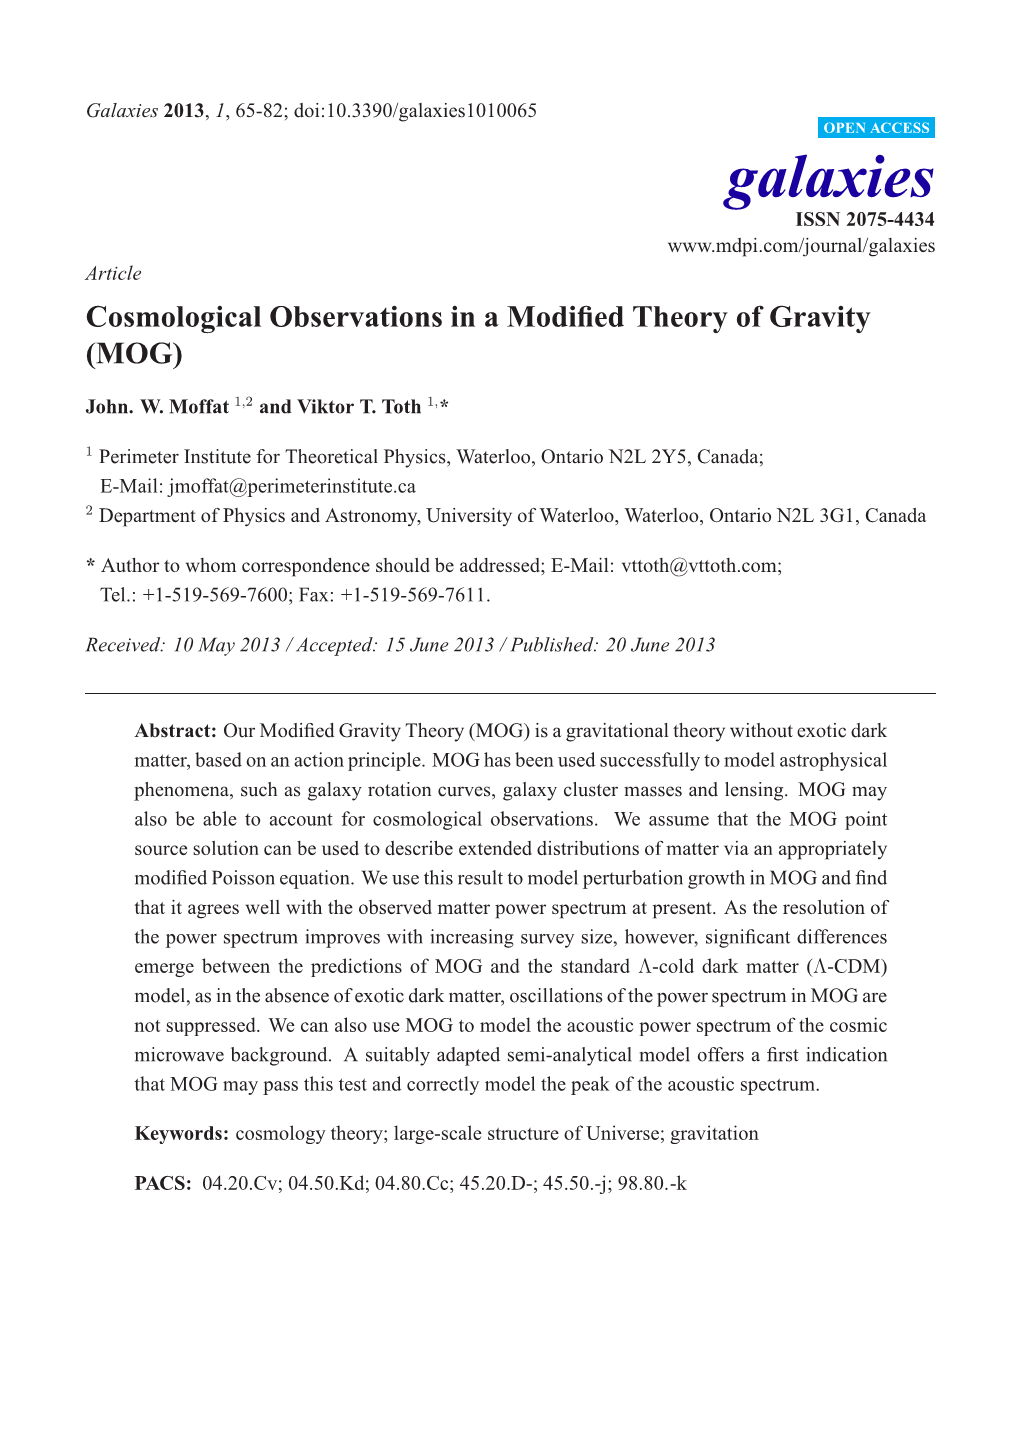 Cosmological Observations in a Modified Theory of Gravity